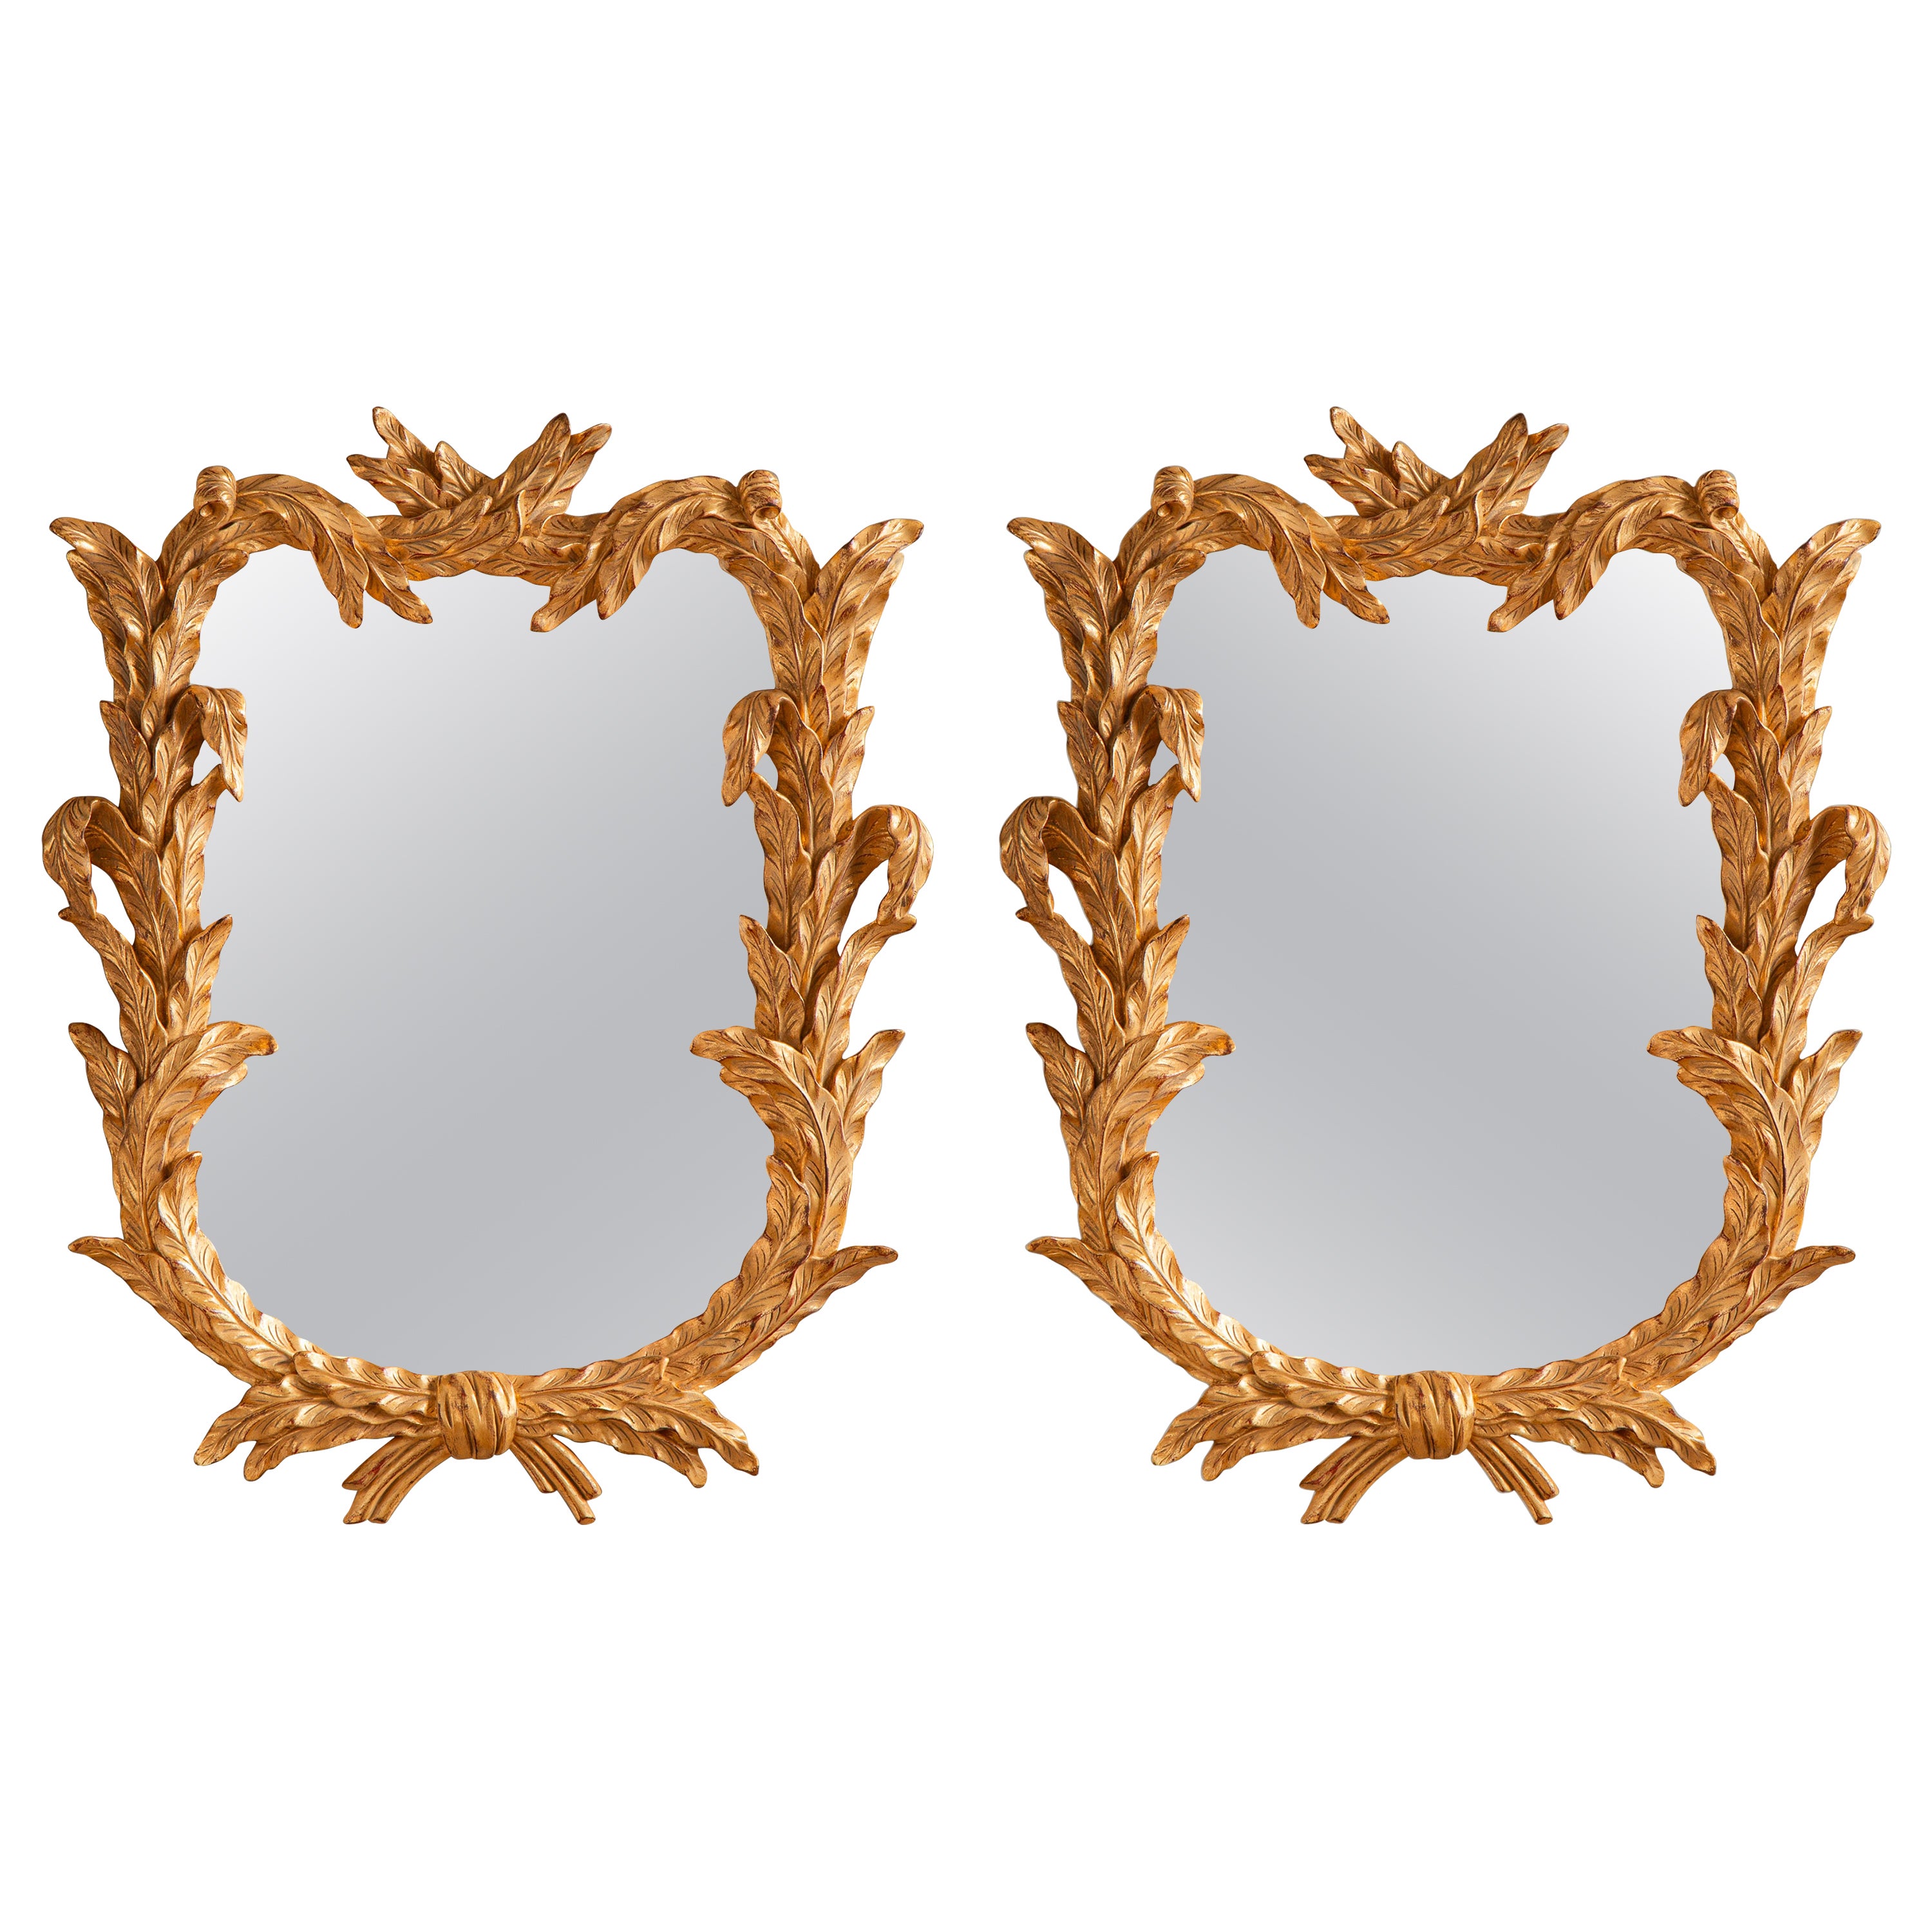 Pair of Giltwood George the third Style Mirror Made by La Maison London For Sale